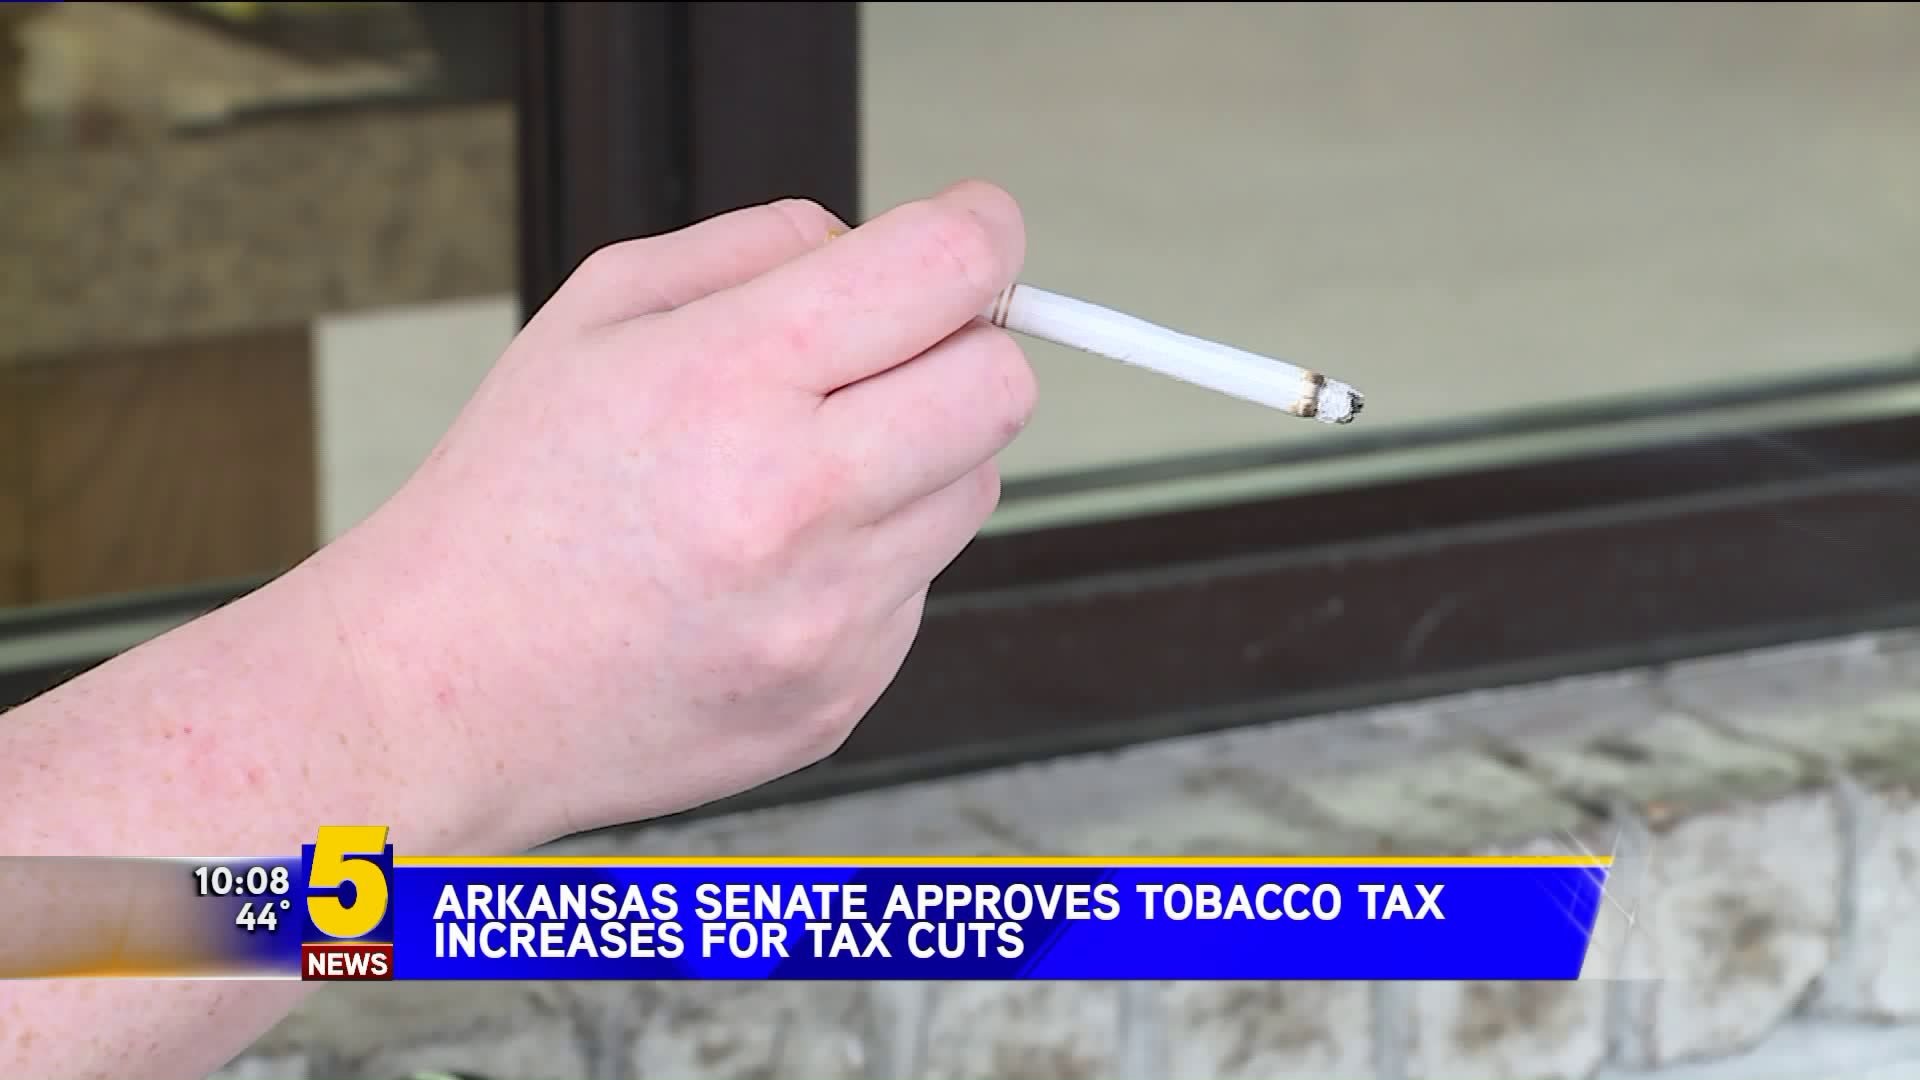 AR Senate Approves Tobacco Tax Increases For Tax Cuts